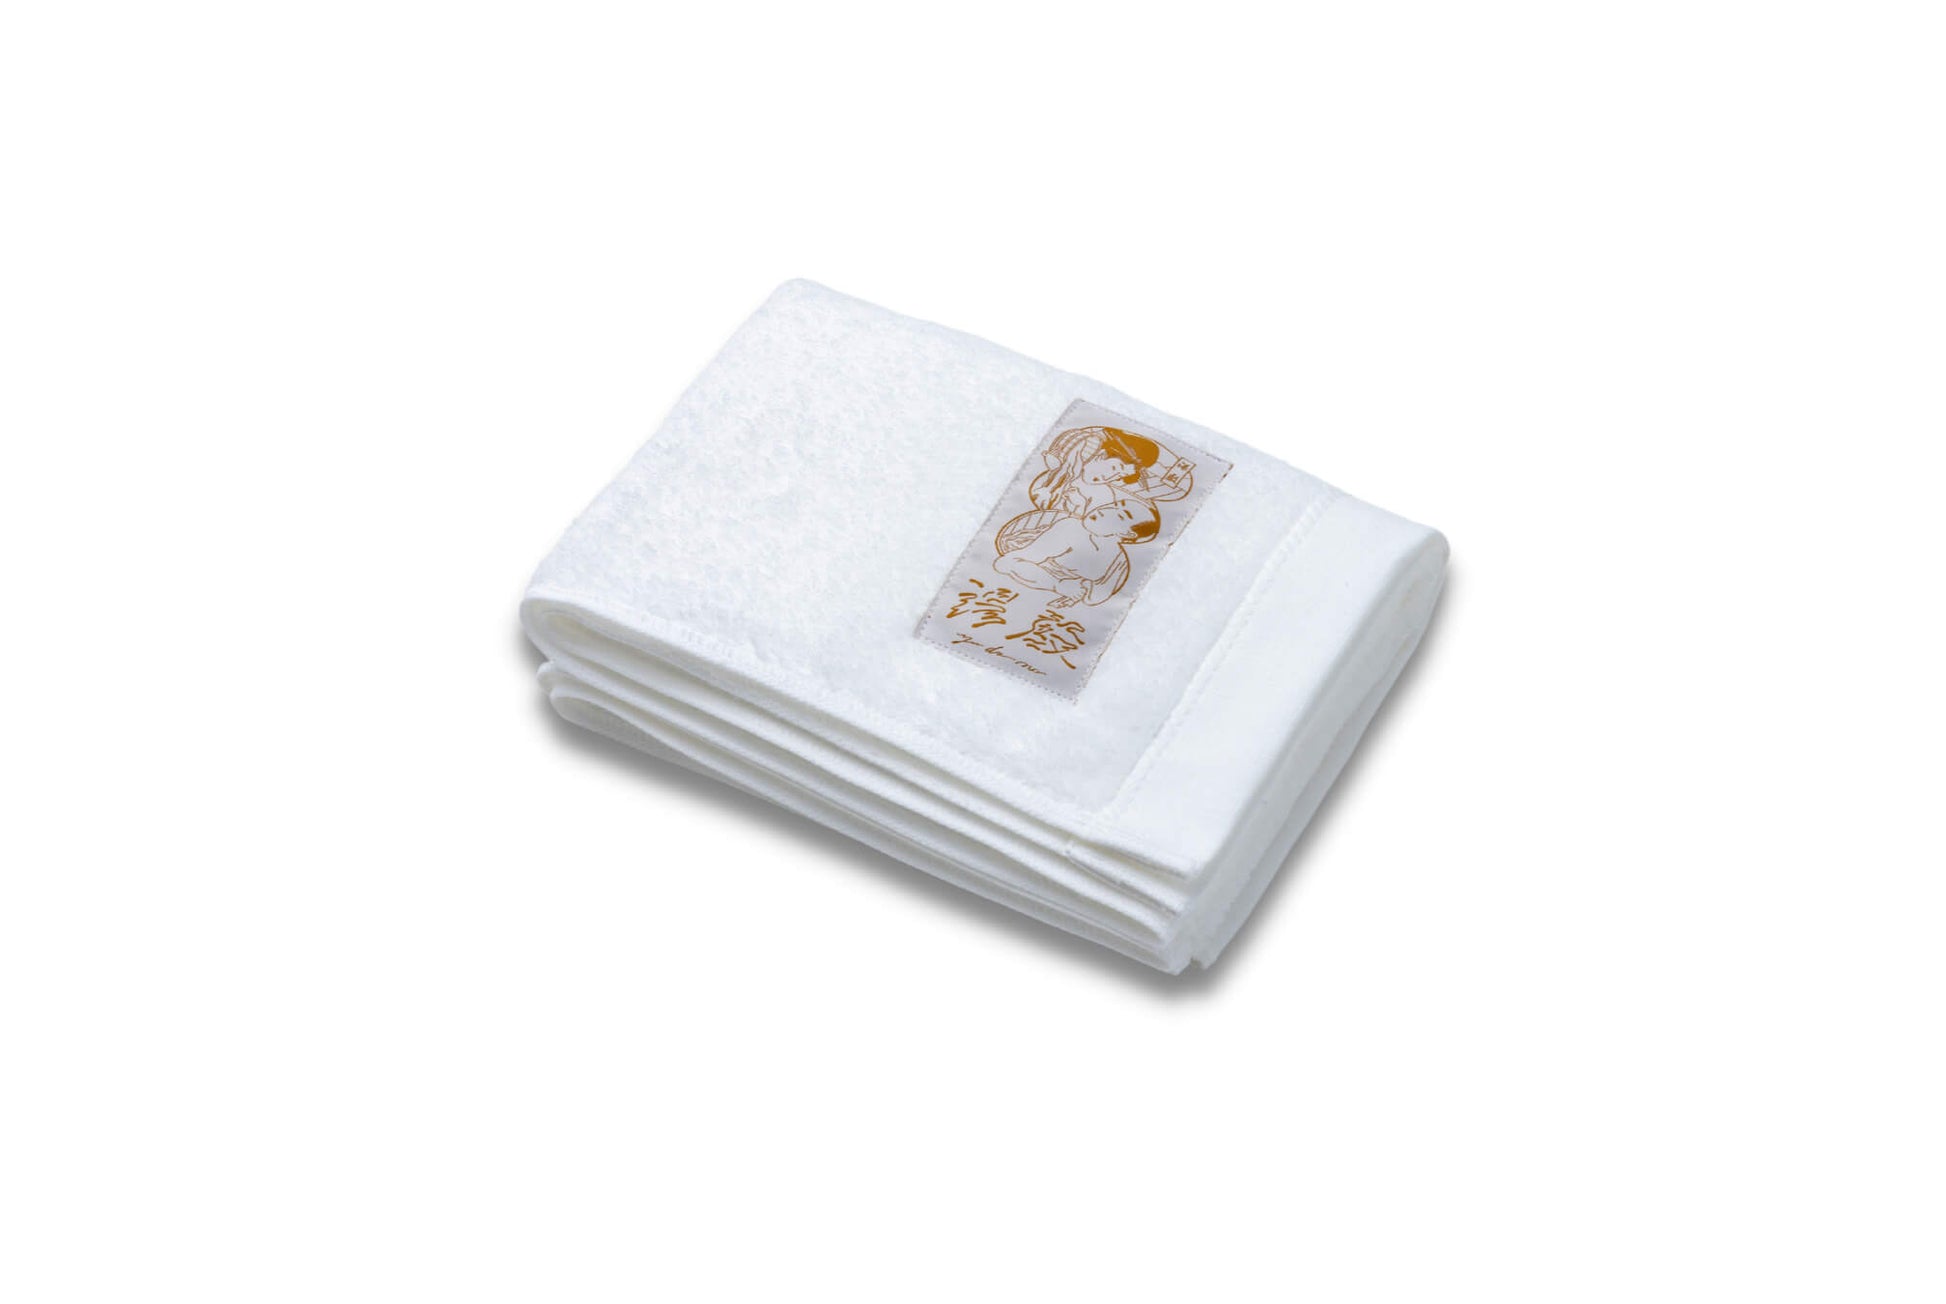 This is also a white JAPANESE BATH TOWEL from JAPARCANA